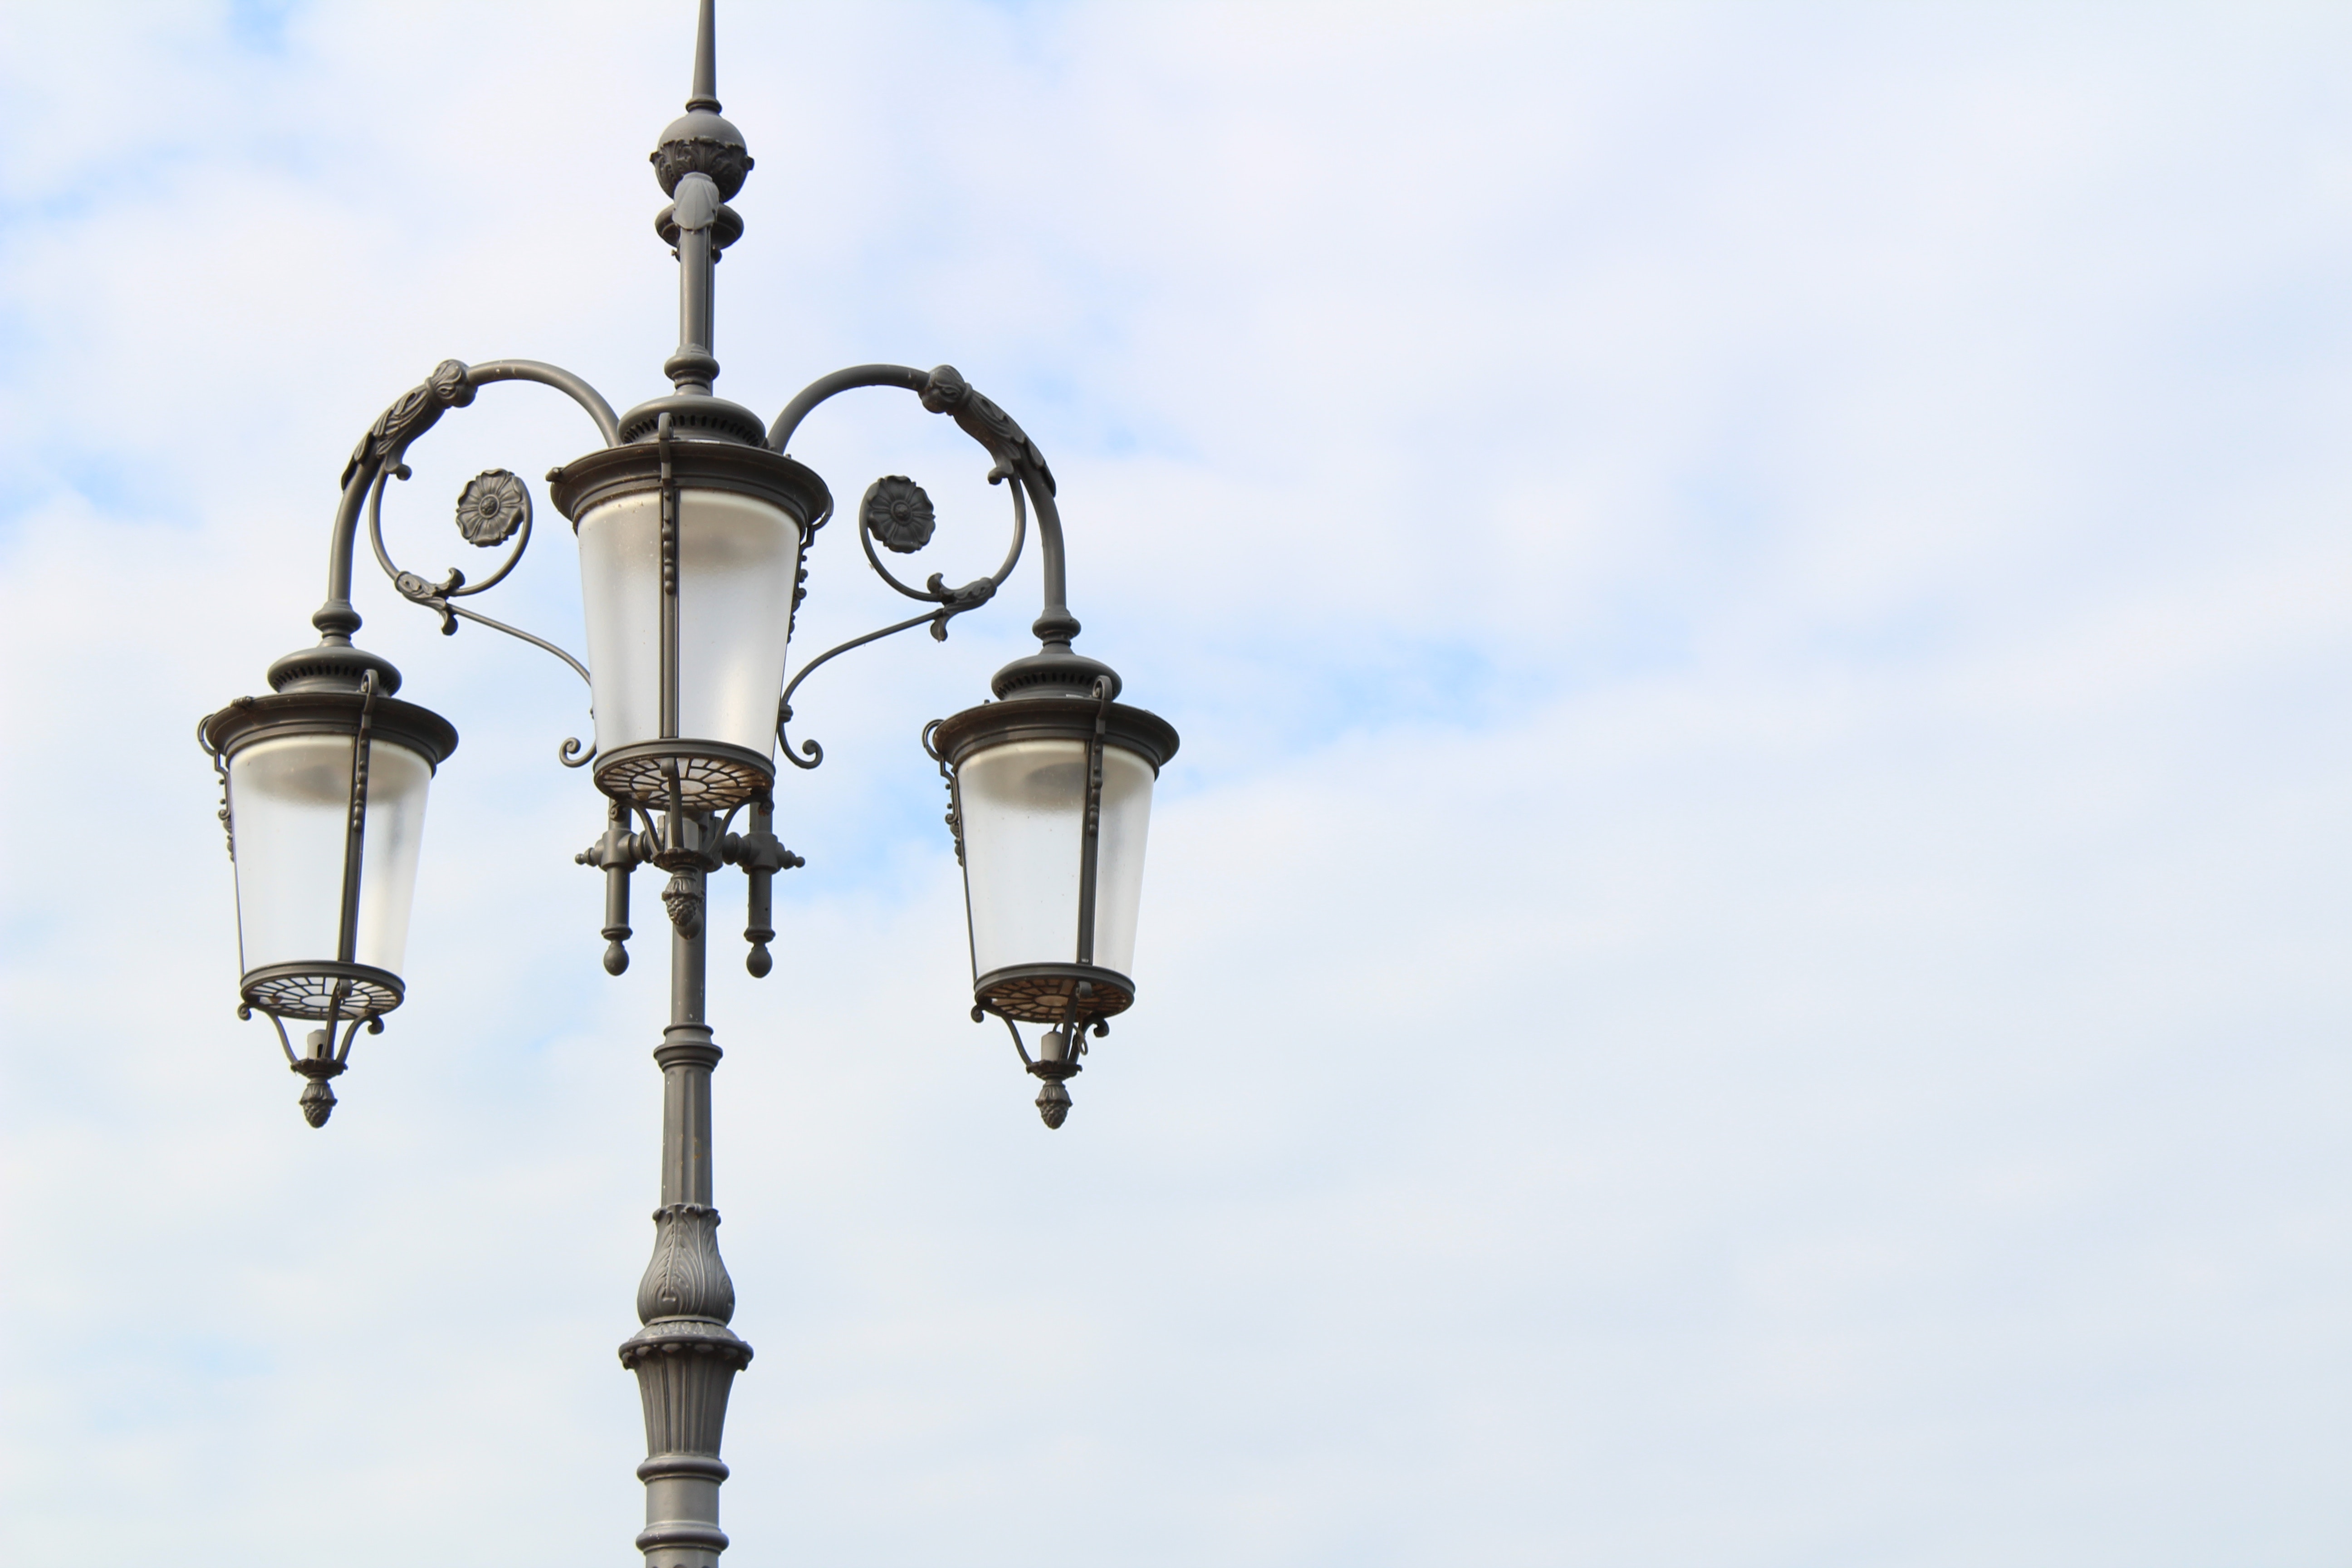 The Thingsquare Blog: Build a Wireless Street Lighting System